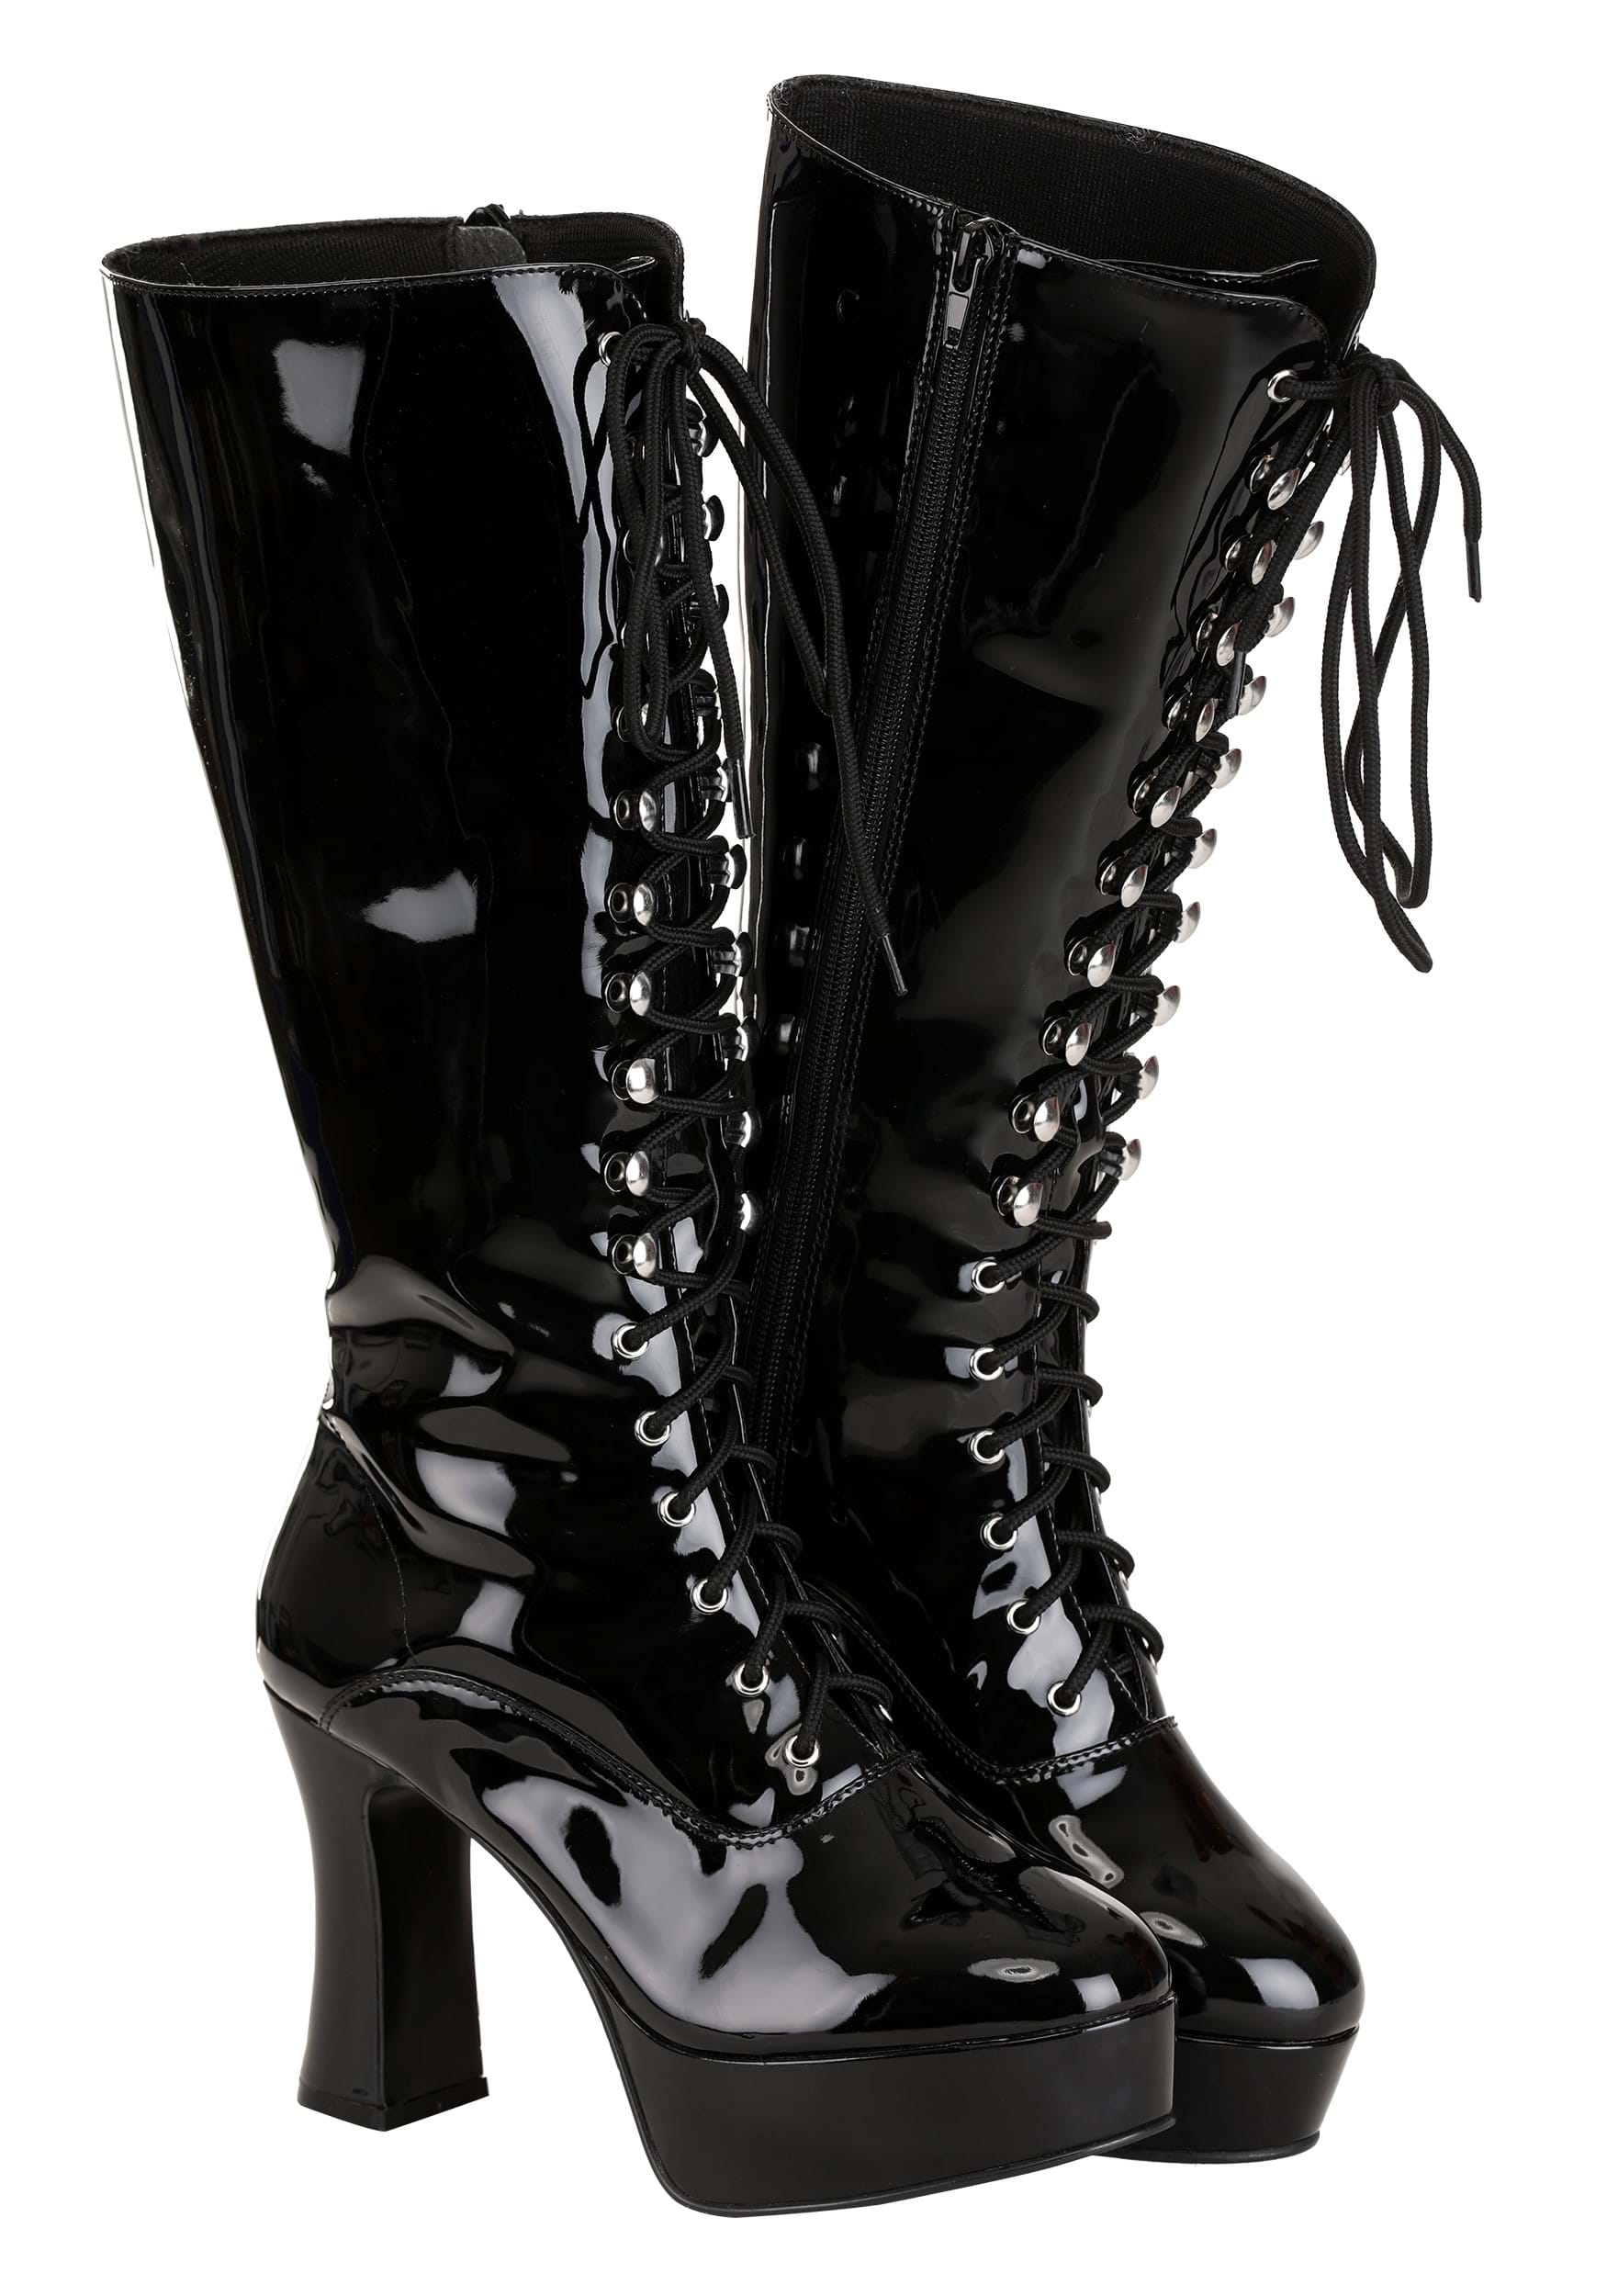 Women’s Sexy Black Faux Leather Knee High Boots